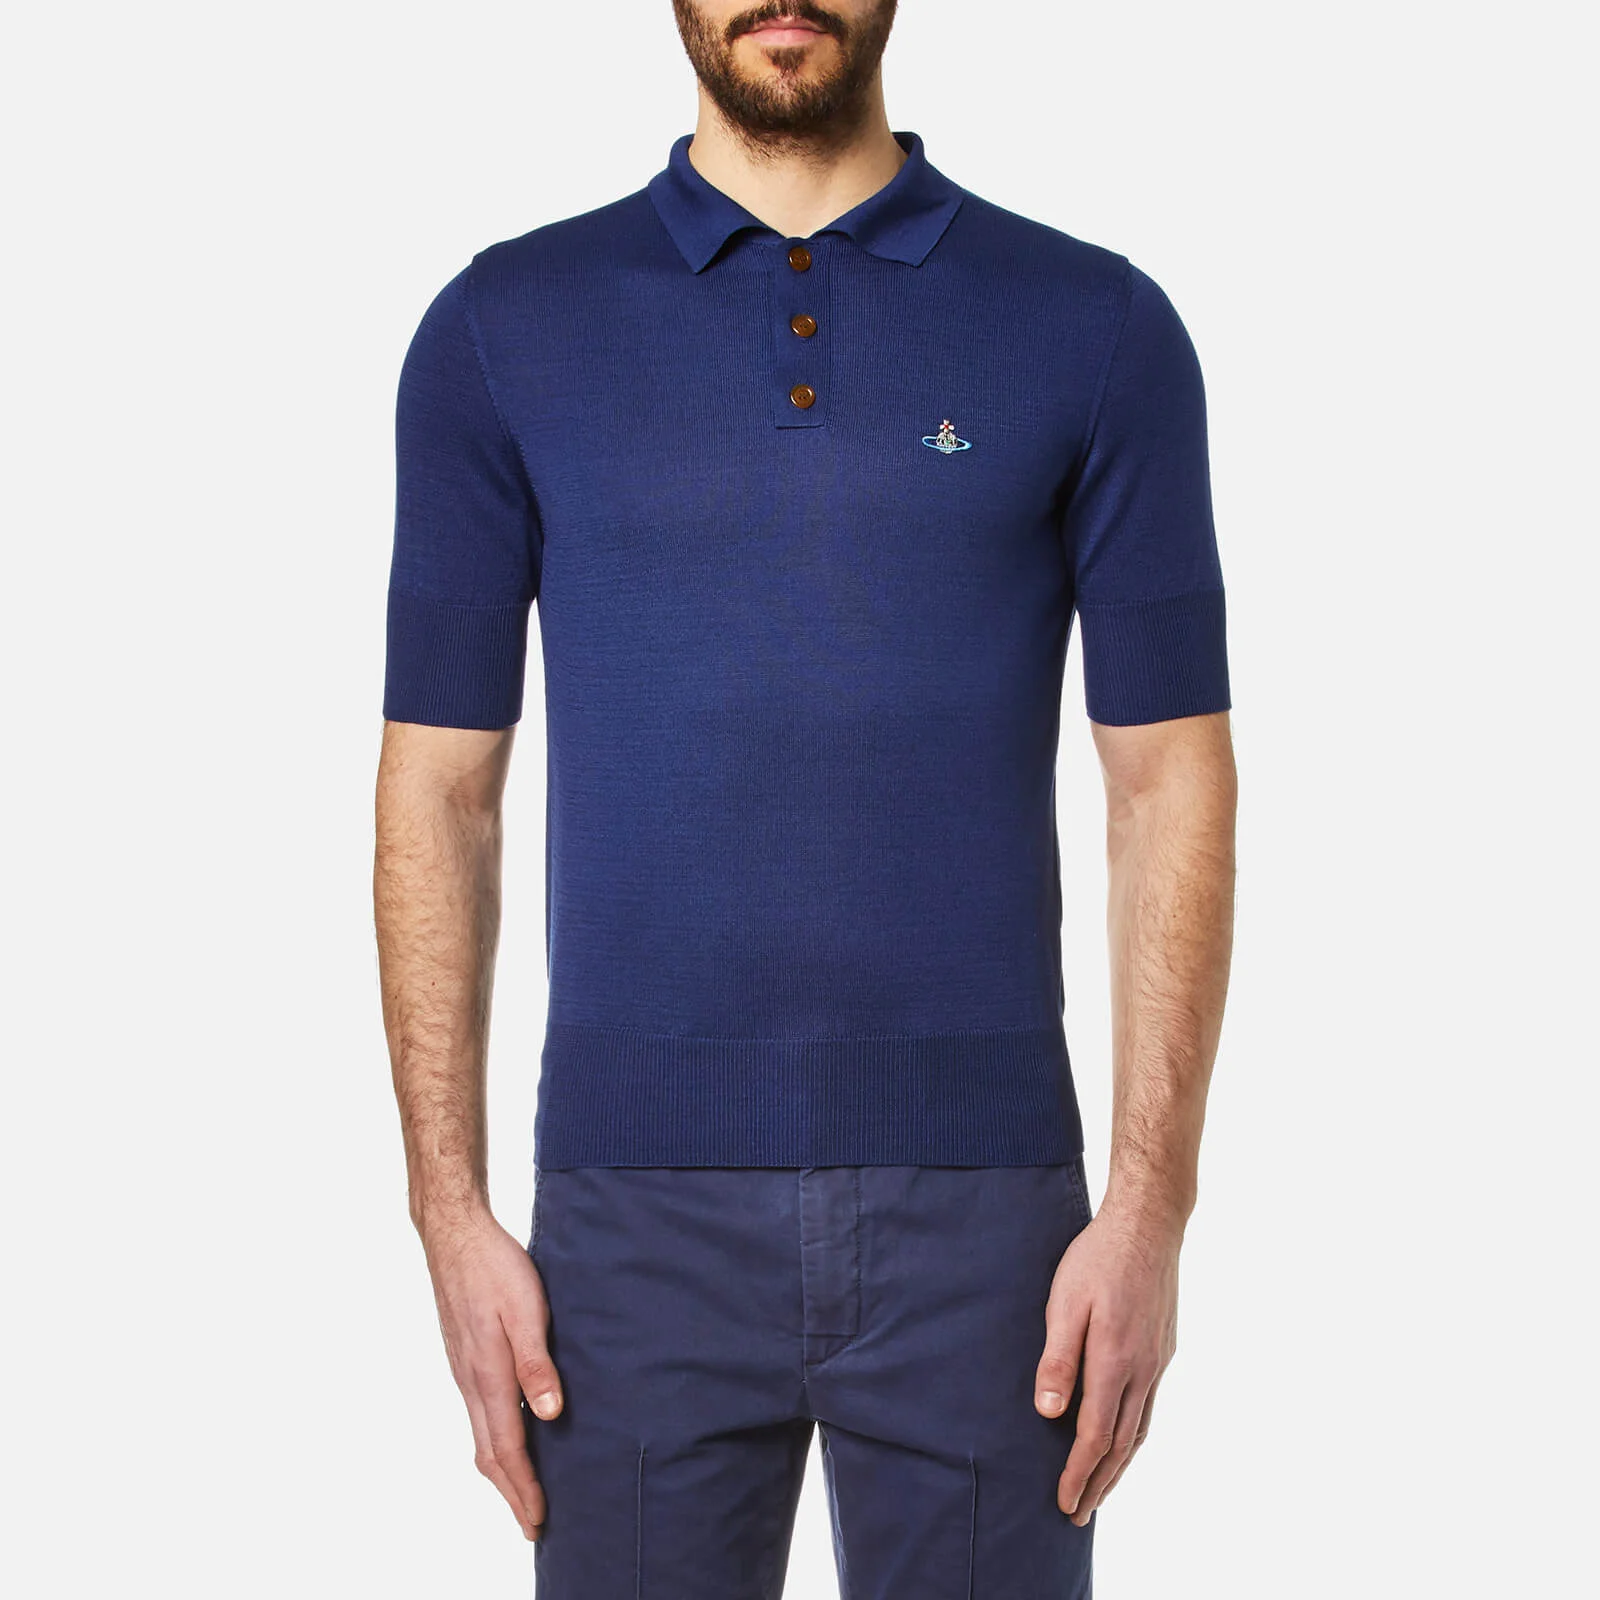 Vivienne Westwood Men's Classic Knitted Polo Shirt - Blue Image 1